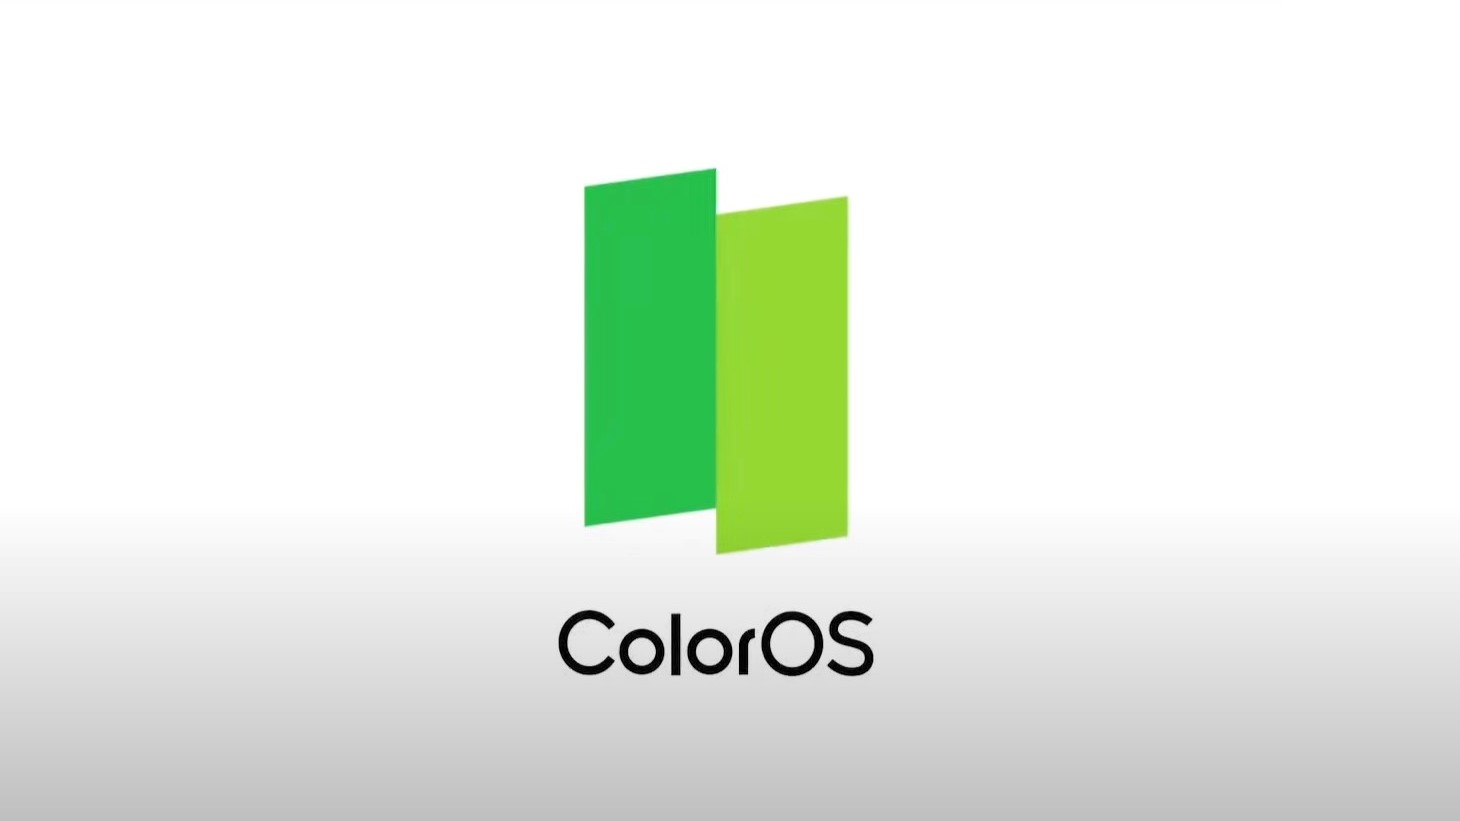 OPPO ColorOS 11 with Android 11